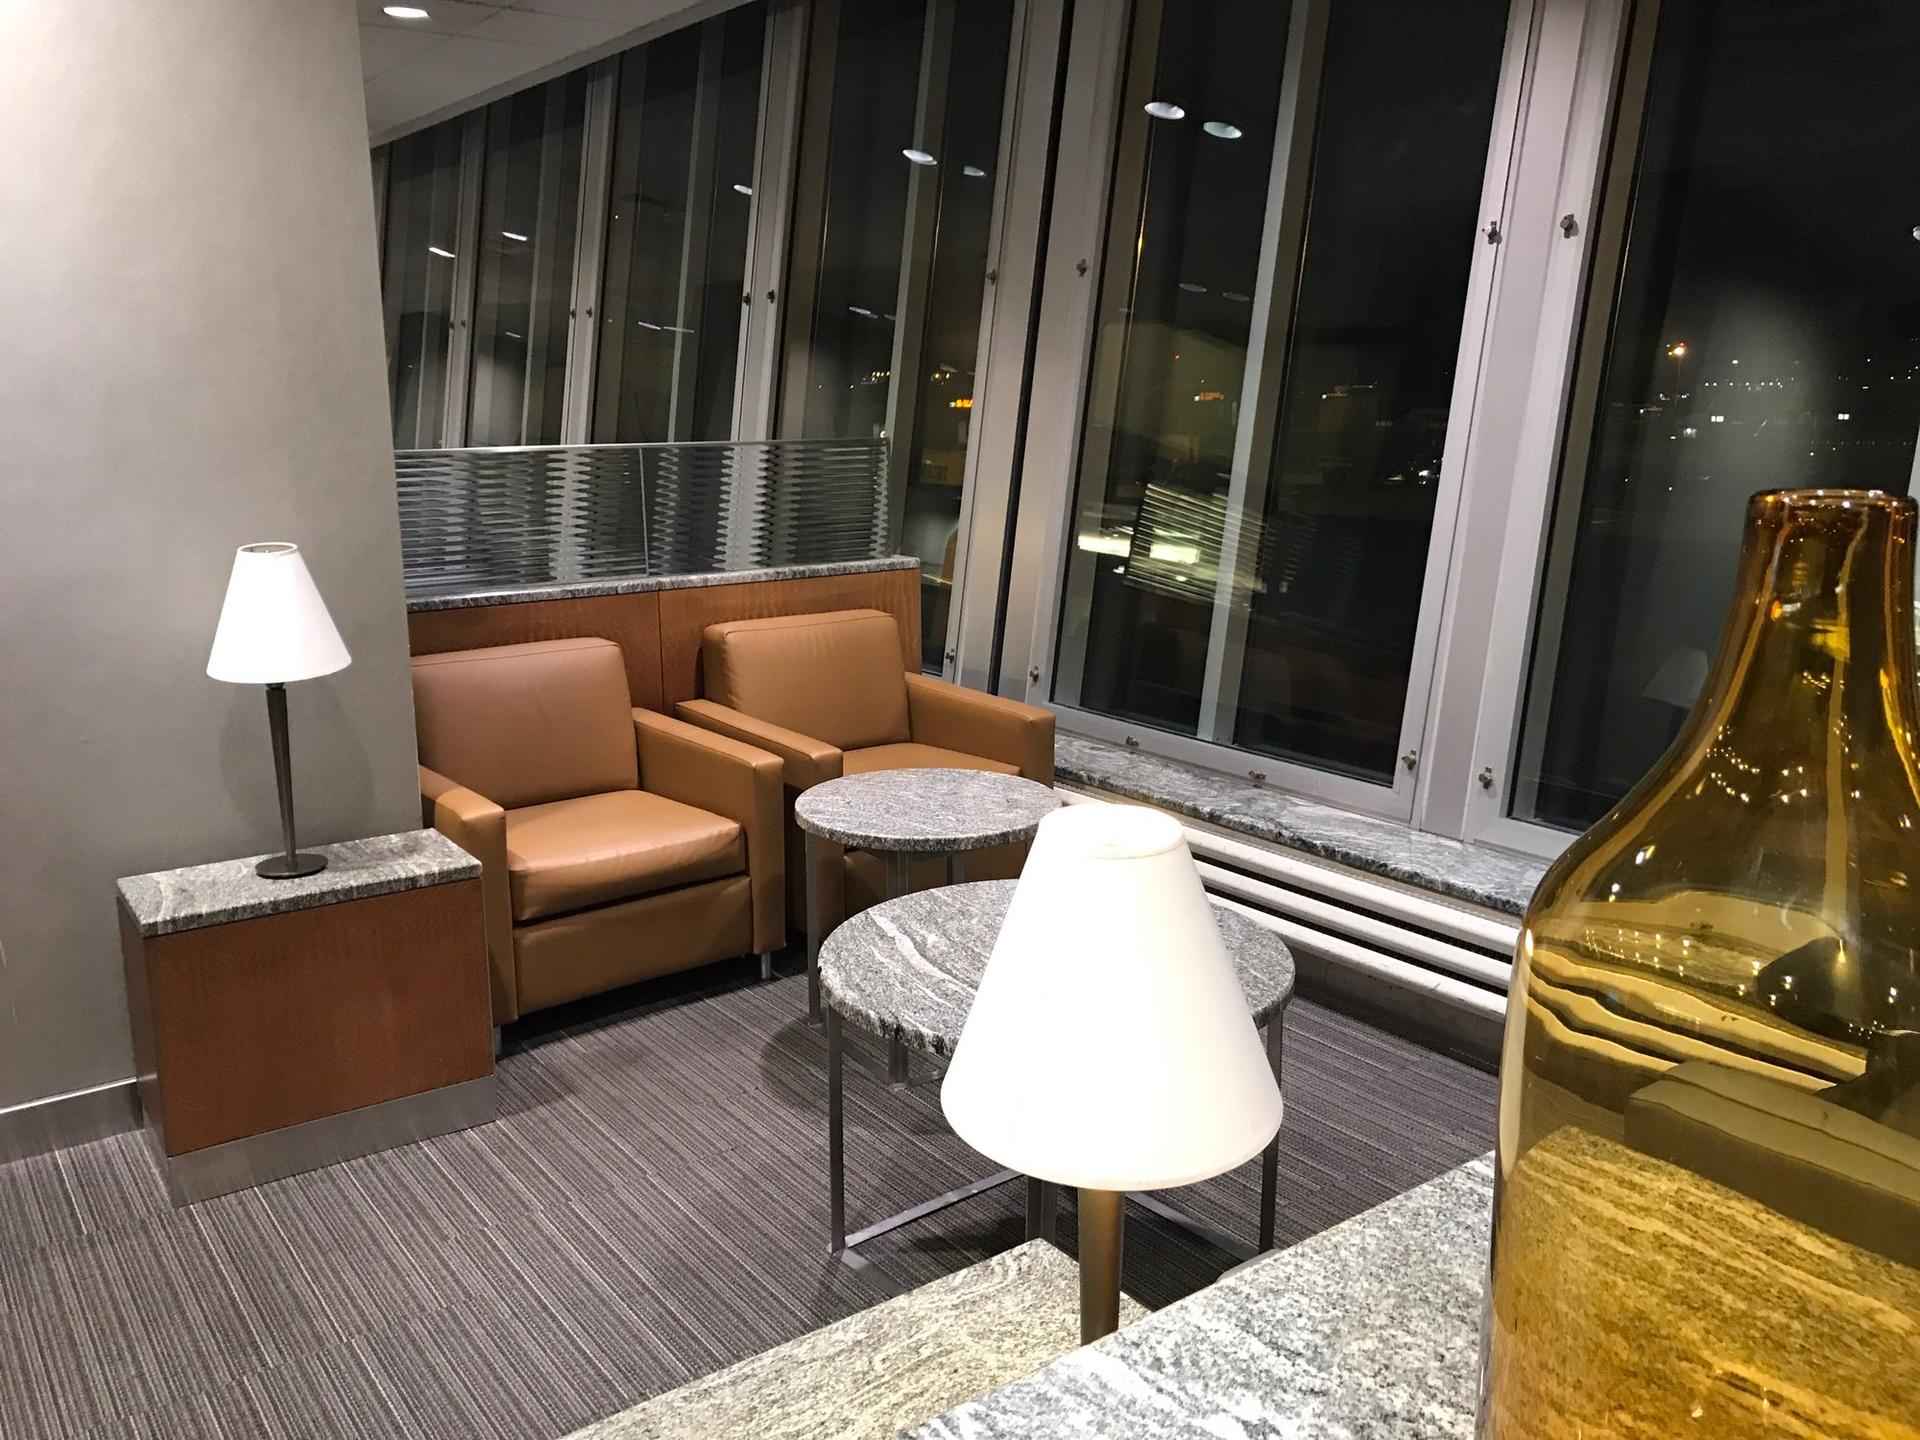 American Airlines Admirals Club image 25 of 48